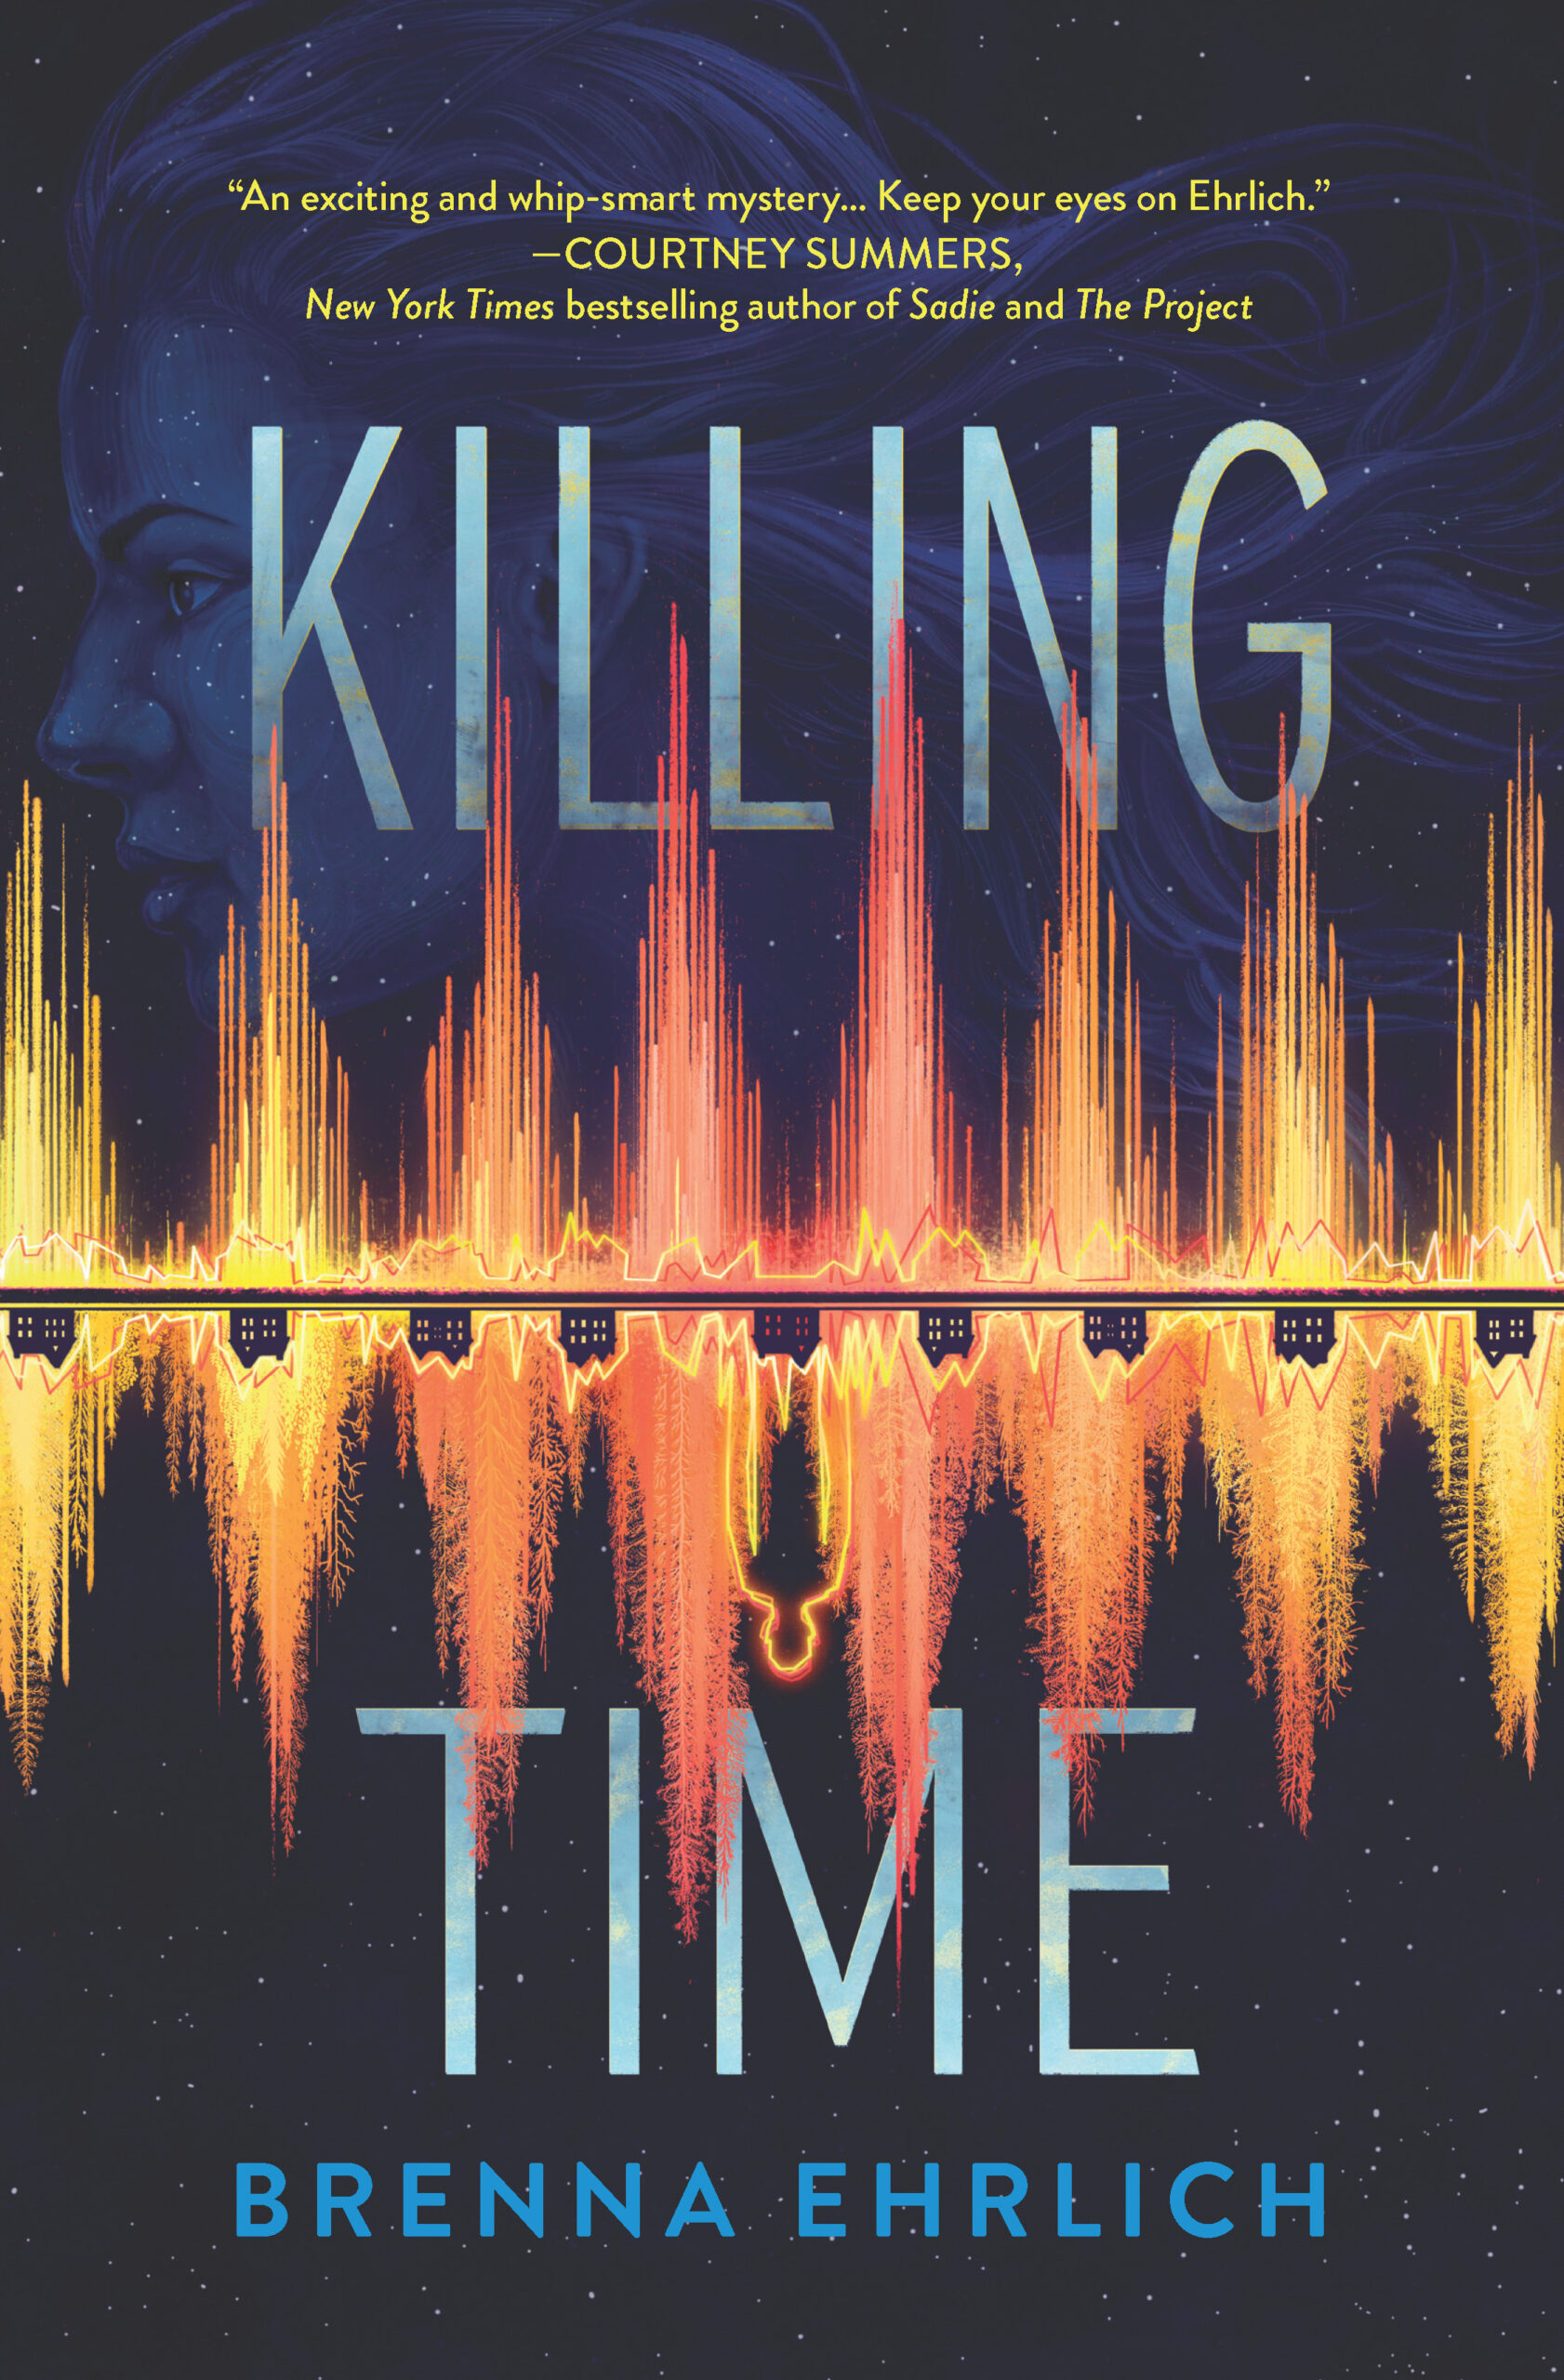 Review: Killing Time by Brenna Ehrlich